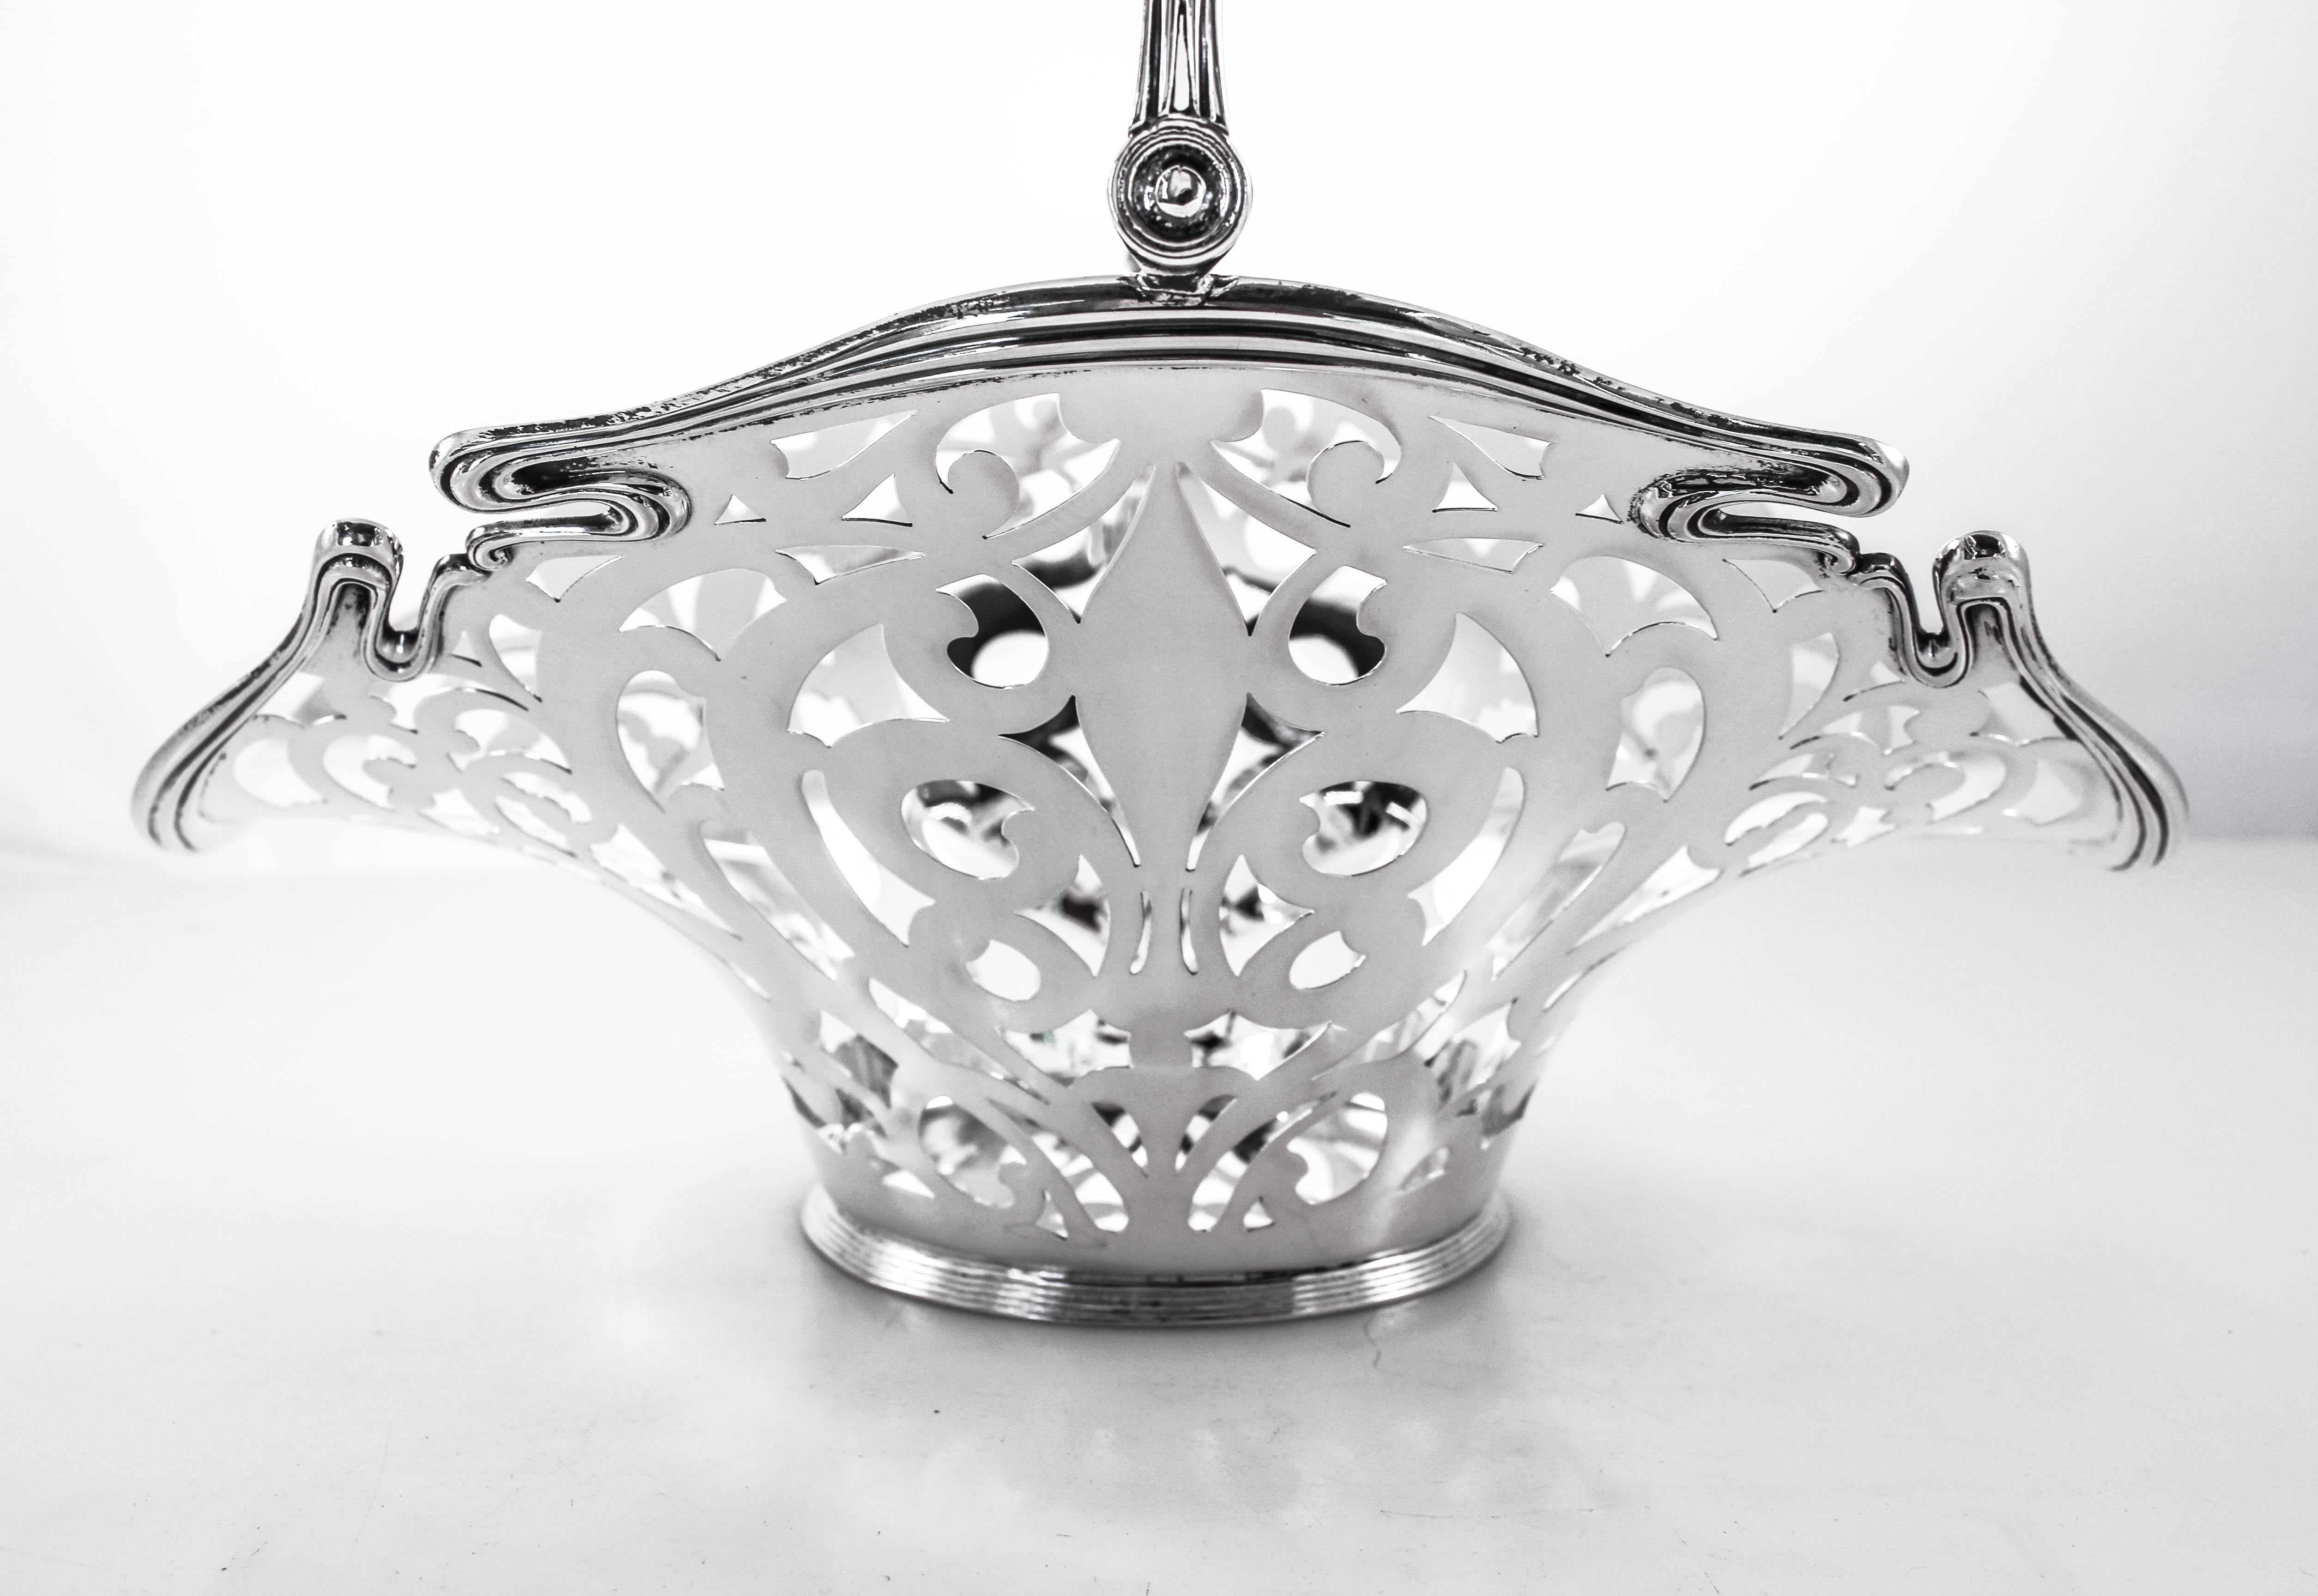 This sterling silver Art Nouveau basket is stunning. Completely reticulated with a scalloped rim, it flares up in the center and dips down on each end. A really unique and eye-catching piece. The handle folds down for easy storage.